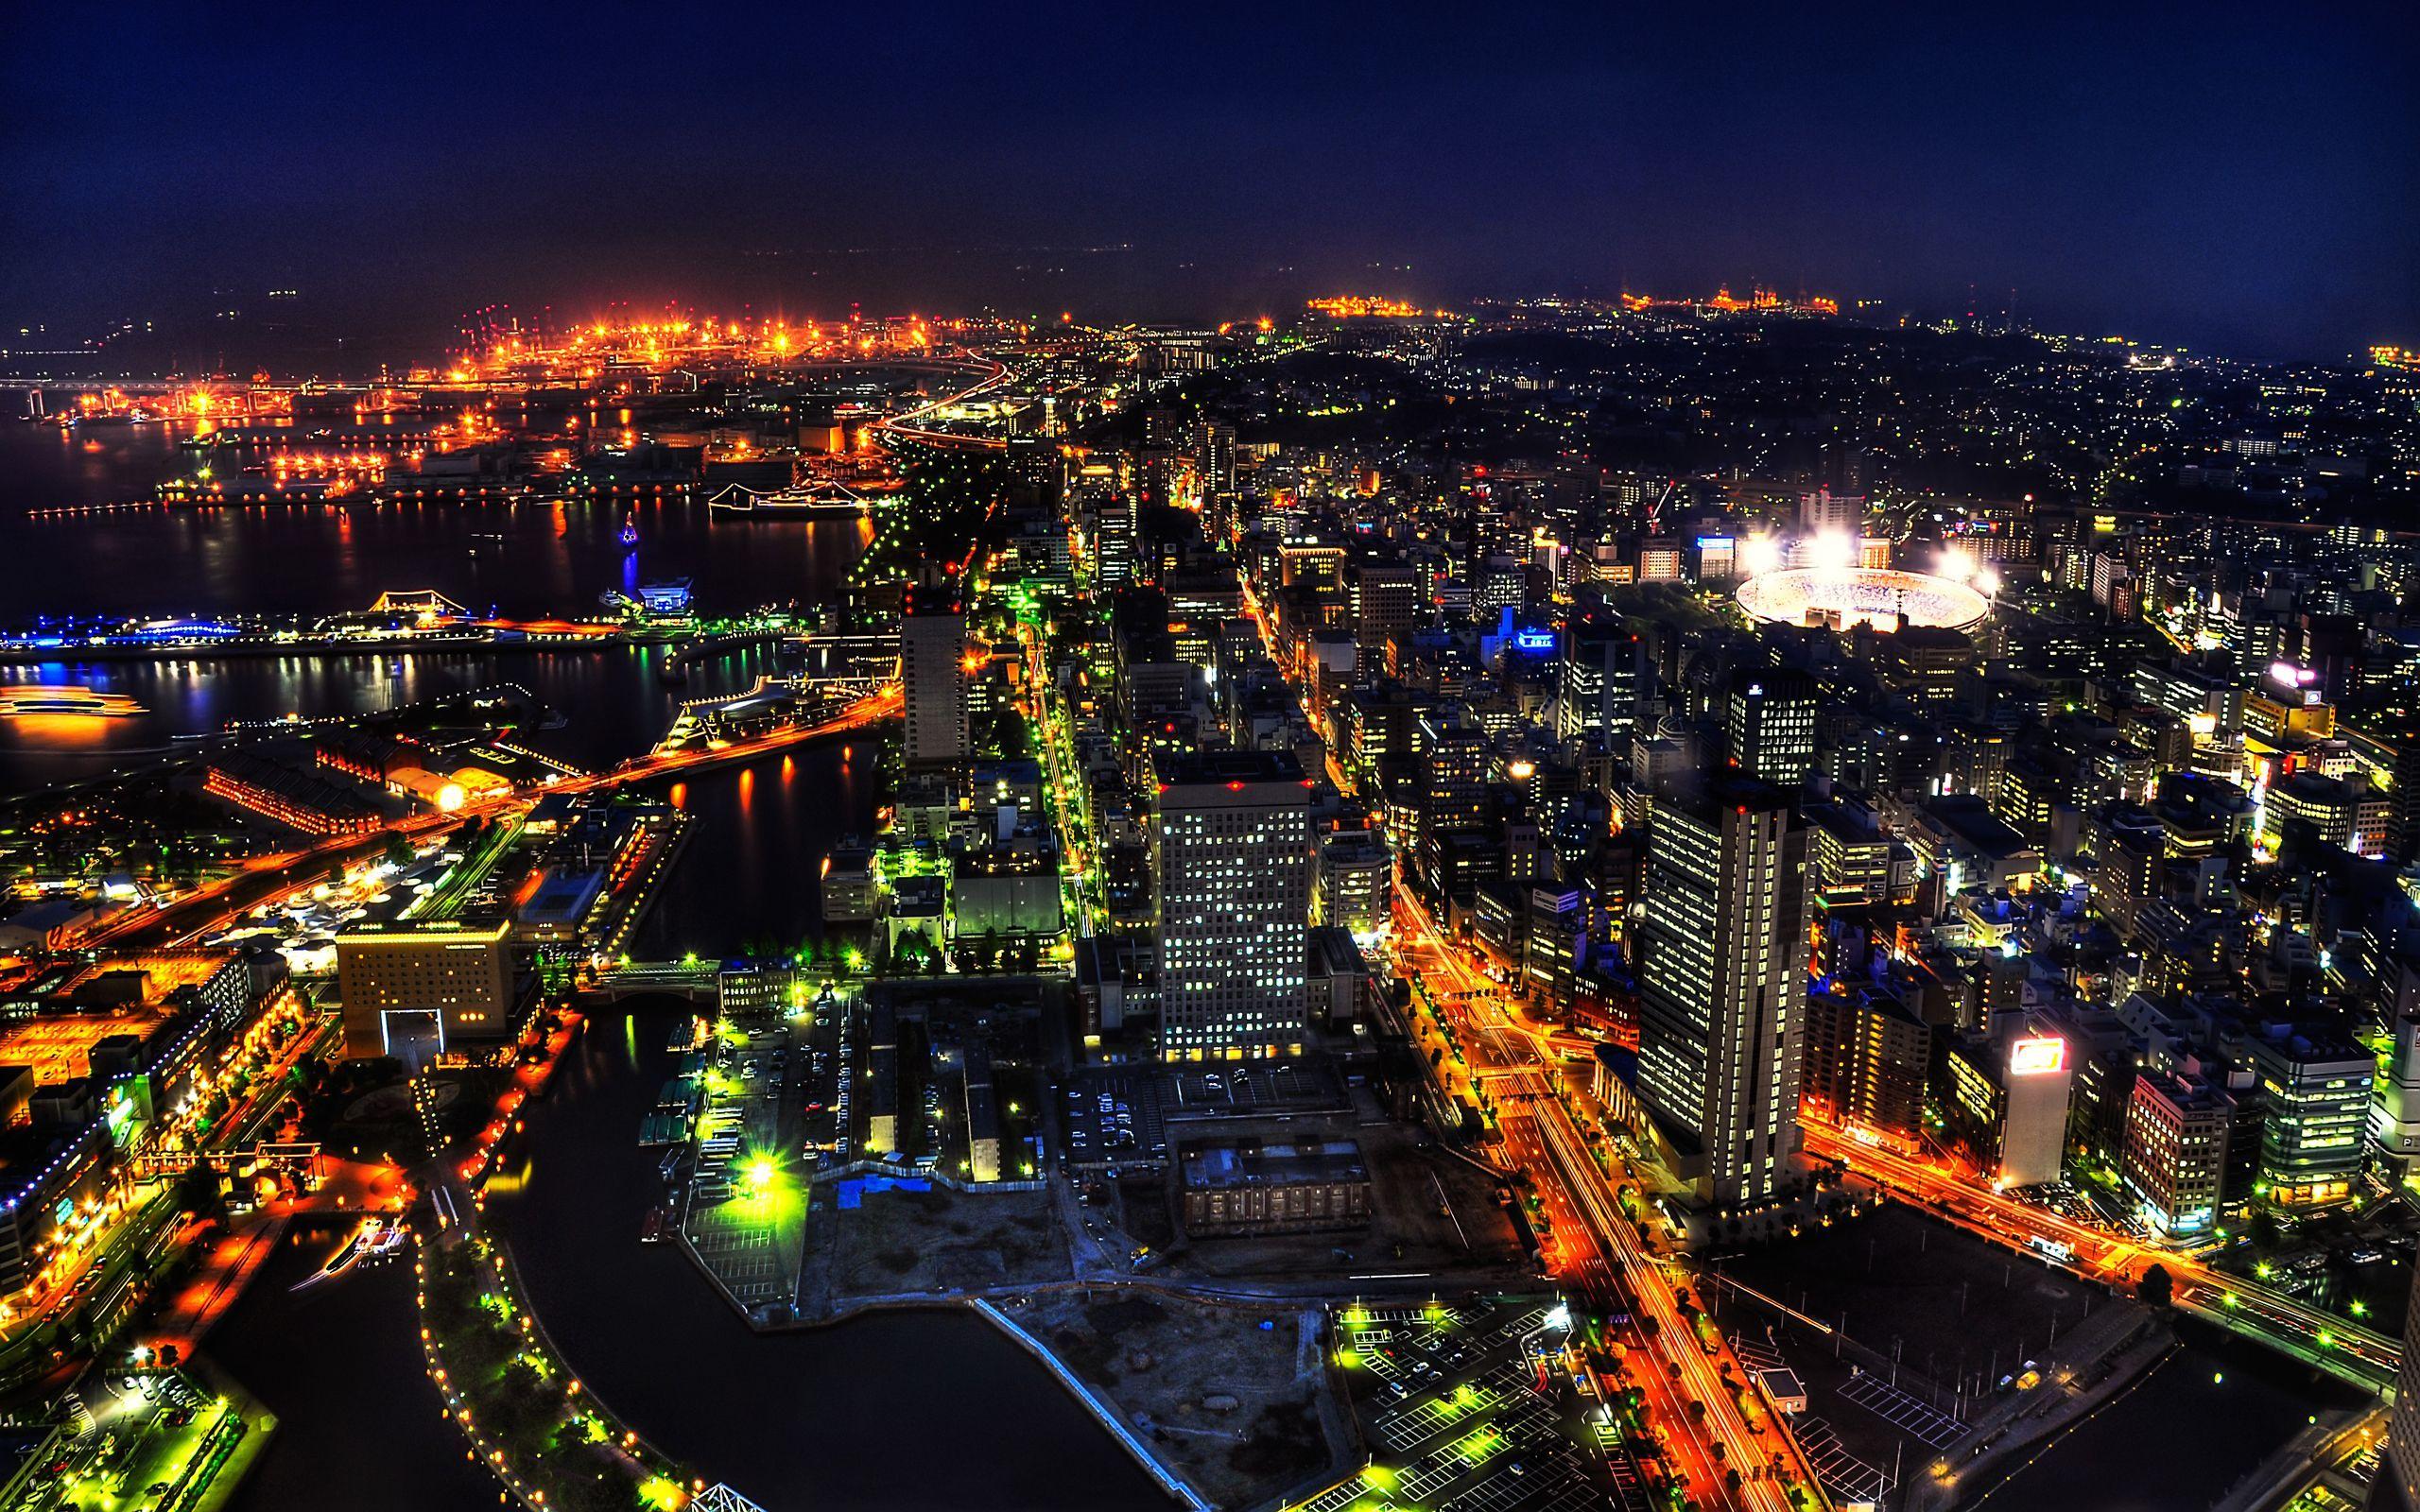 Tokyo, Japan is a city with many different activities to participate in